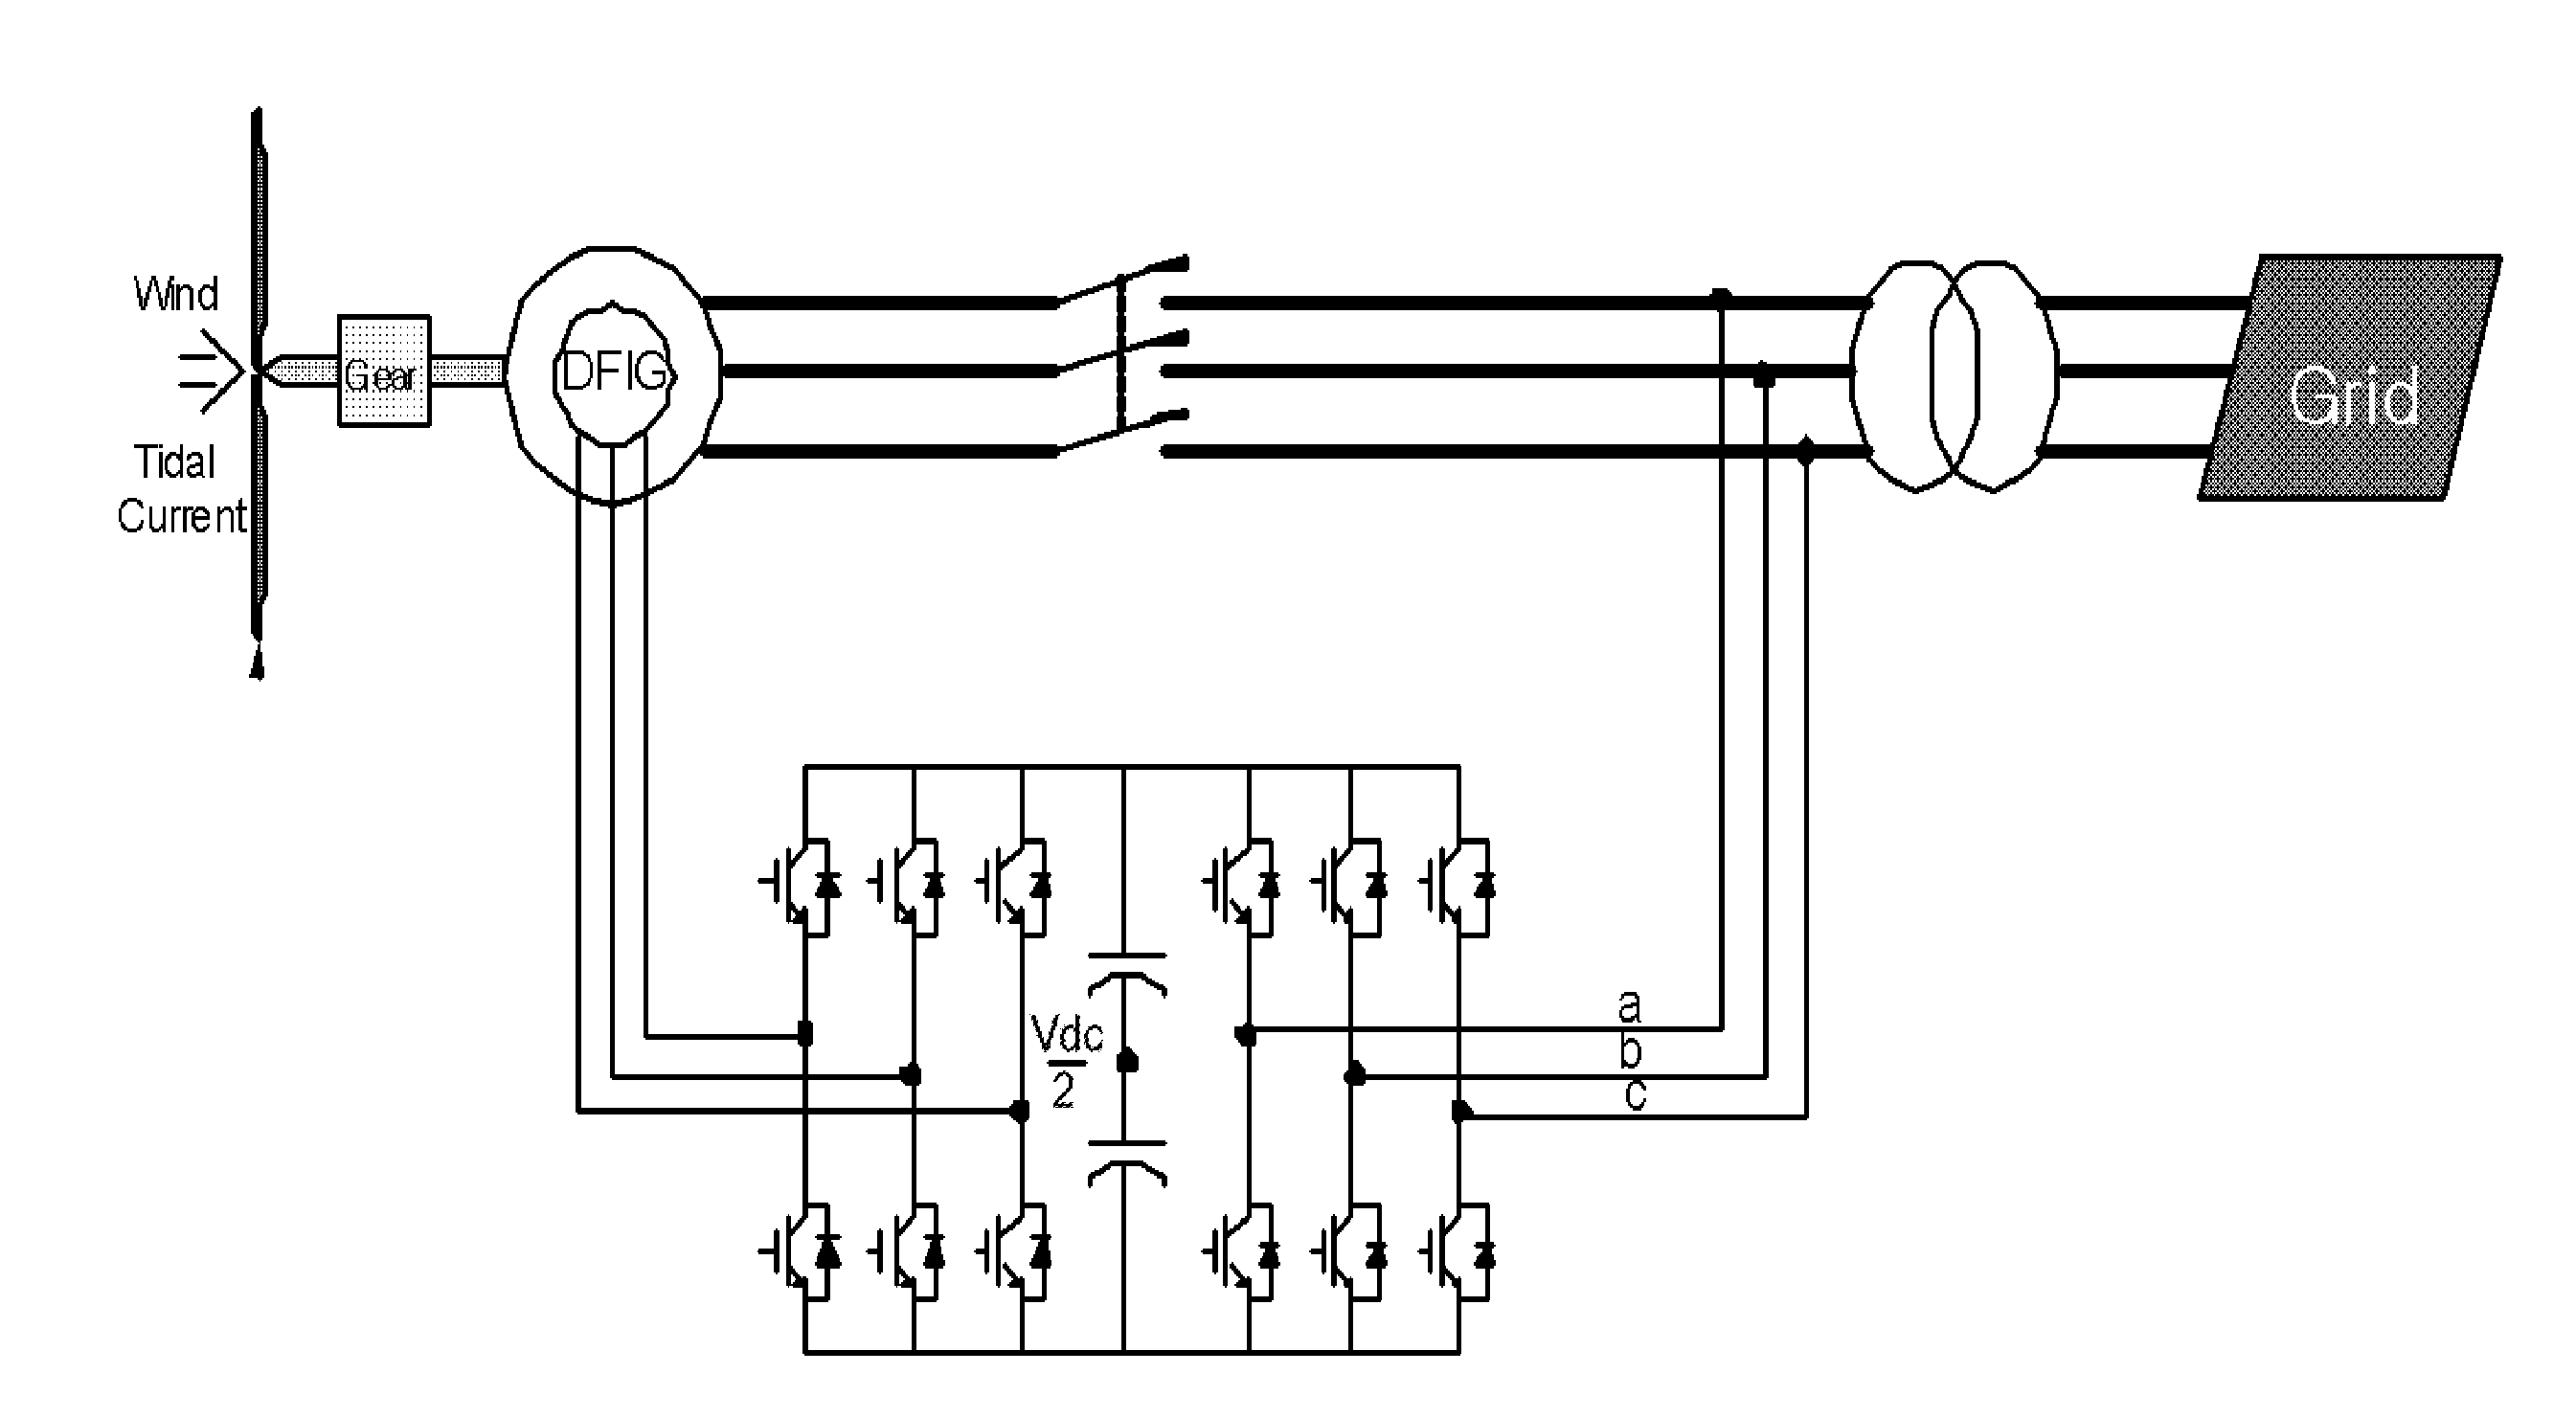 Control Device for Doubly-Fed Induction Generator in Which Feedback Linearization Method is Embedded